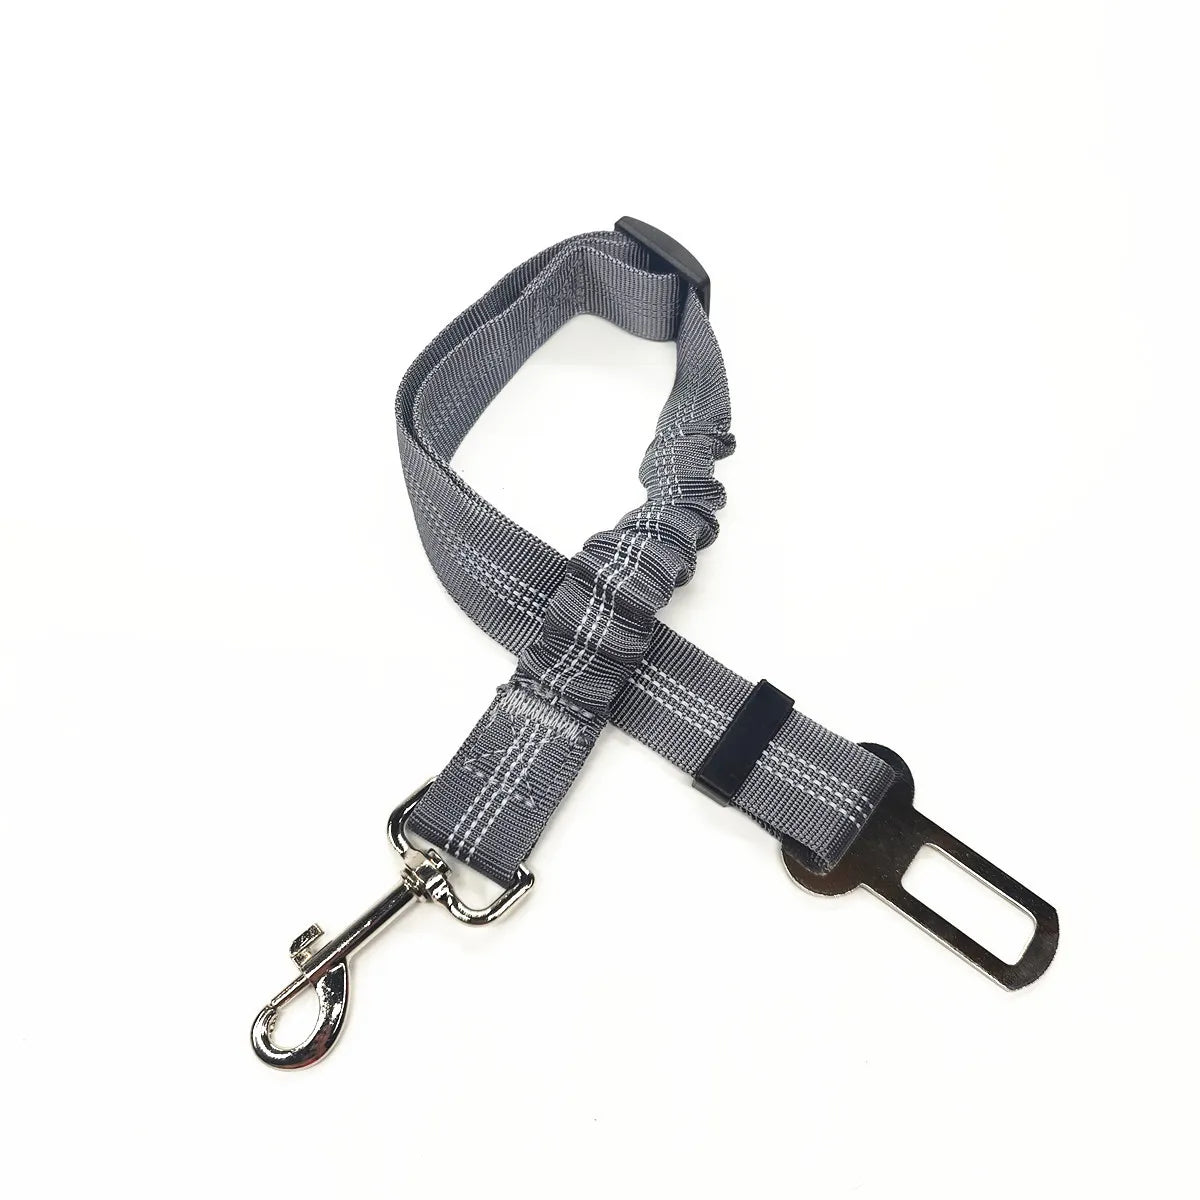 Dog car harness: Adjustable Car Seat Belt for Dogs and Cats